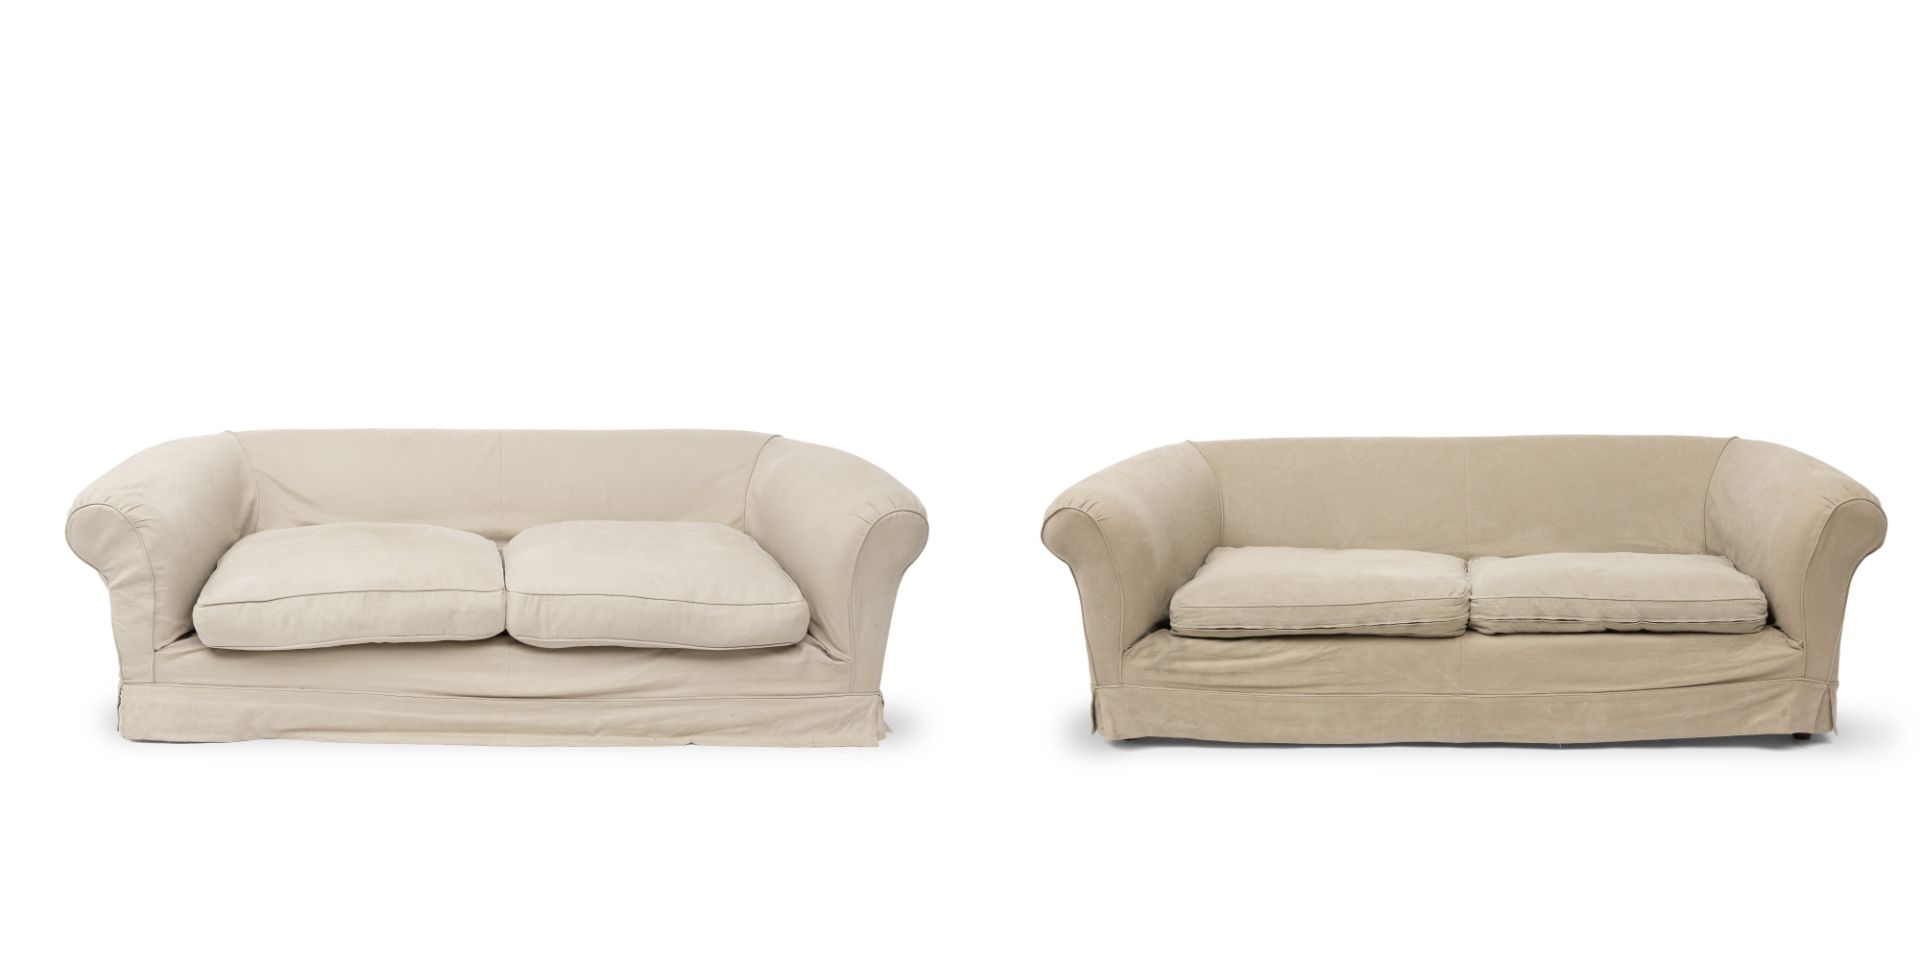 A large pair of upholstered 'Burnham' sofasDesigned by Sir Terence Conran, made by Benchmark Furn...